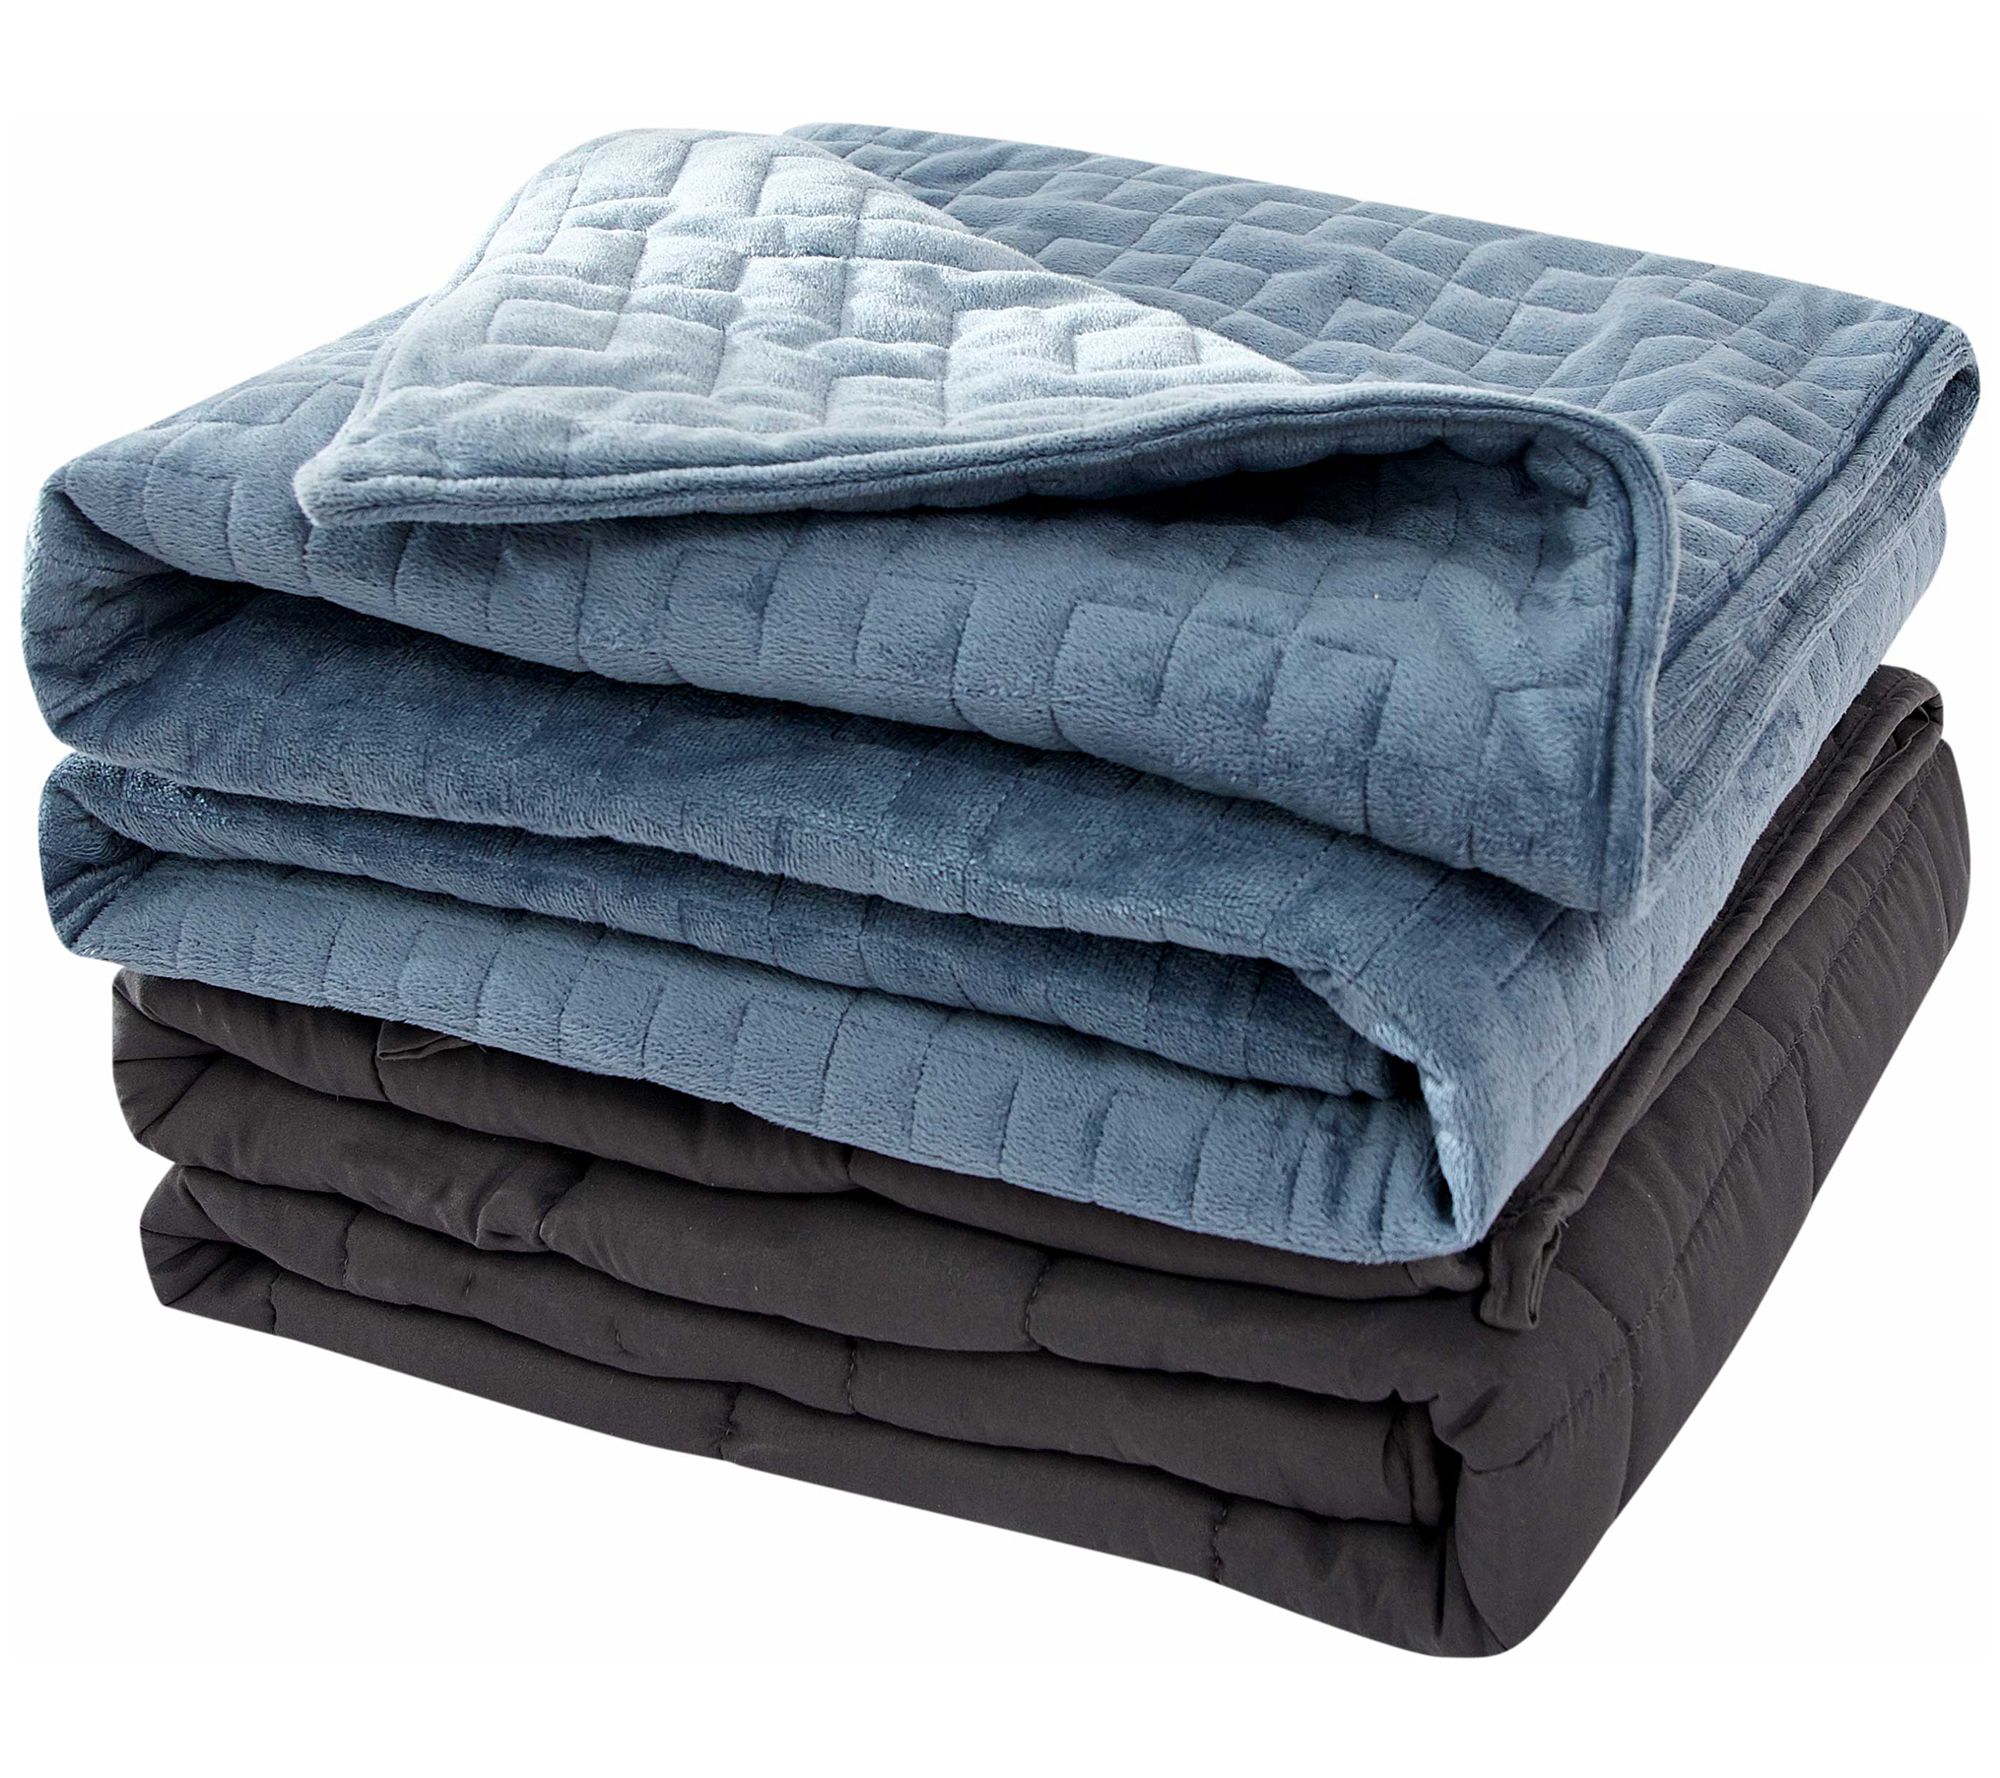 Sutton Home 20 lb Microfiber Weighted Blanketw/Duvet Cover - QVC.com